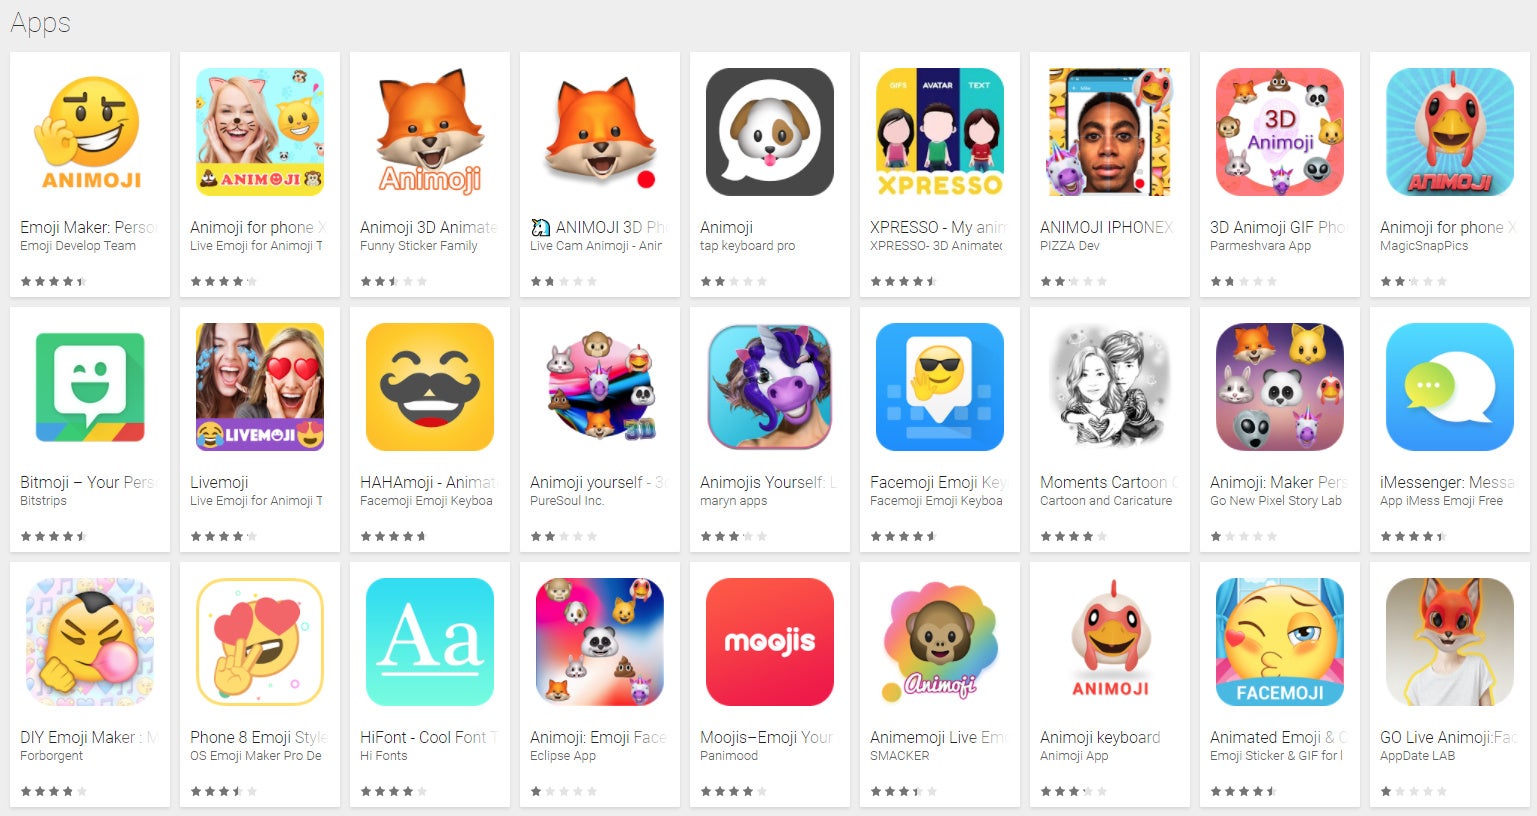 Animoji apps on Android are a fraud - Animoji apps for Android? They are all a fraud